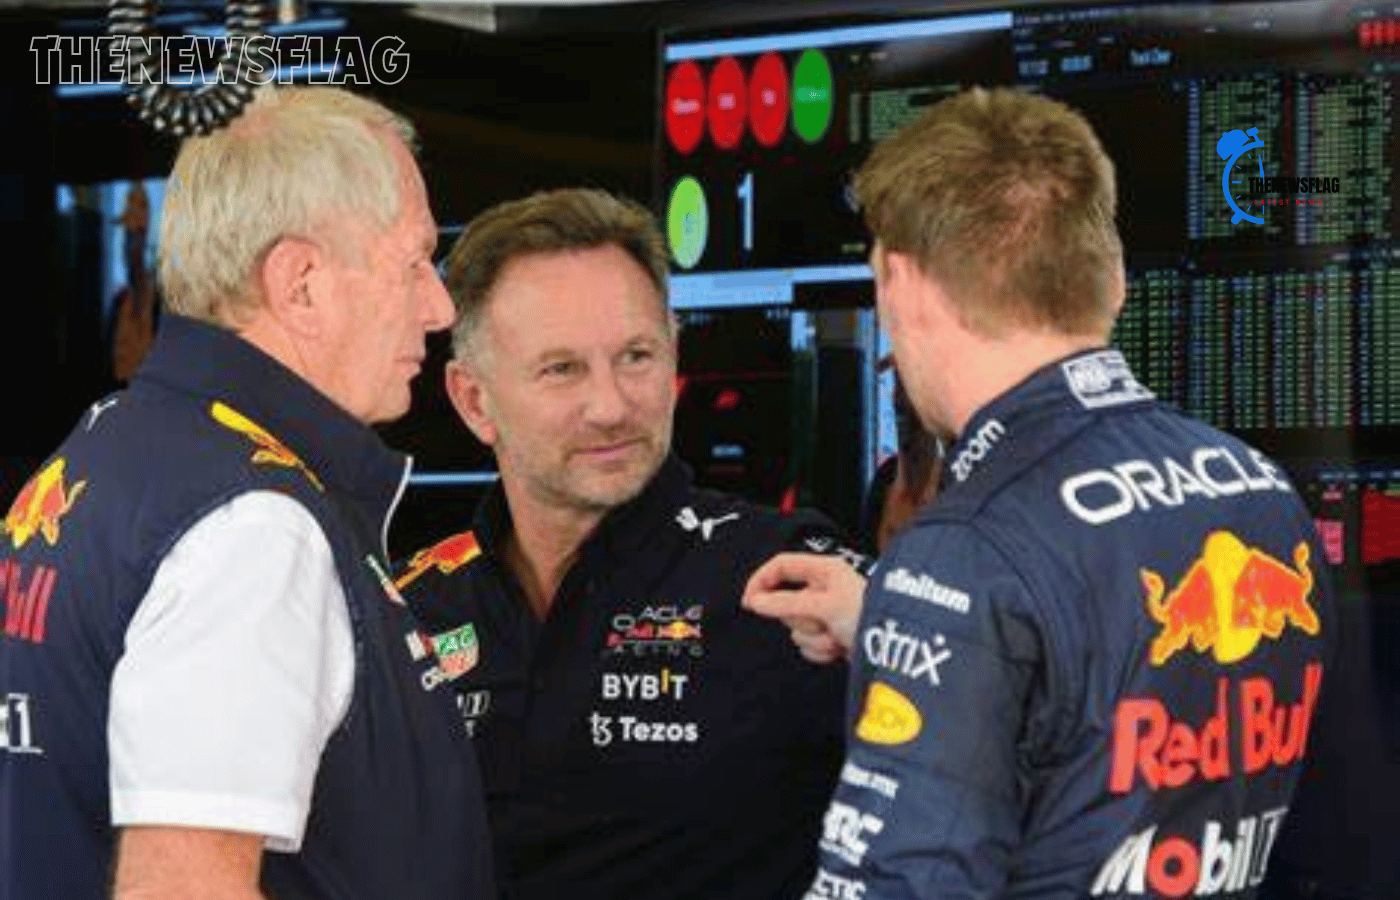 Max Verstappen, Helmut Marko, and Christian Horner of Red Bull show "happy families' unity among "sex texts."